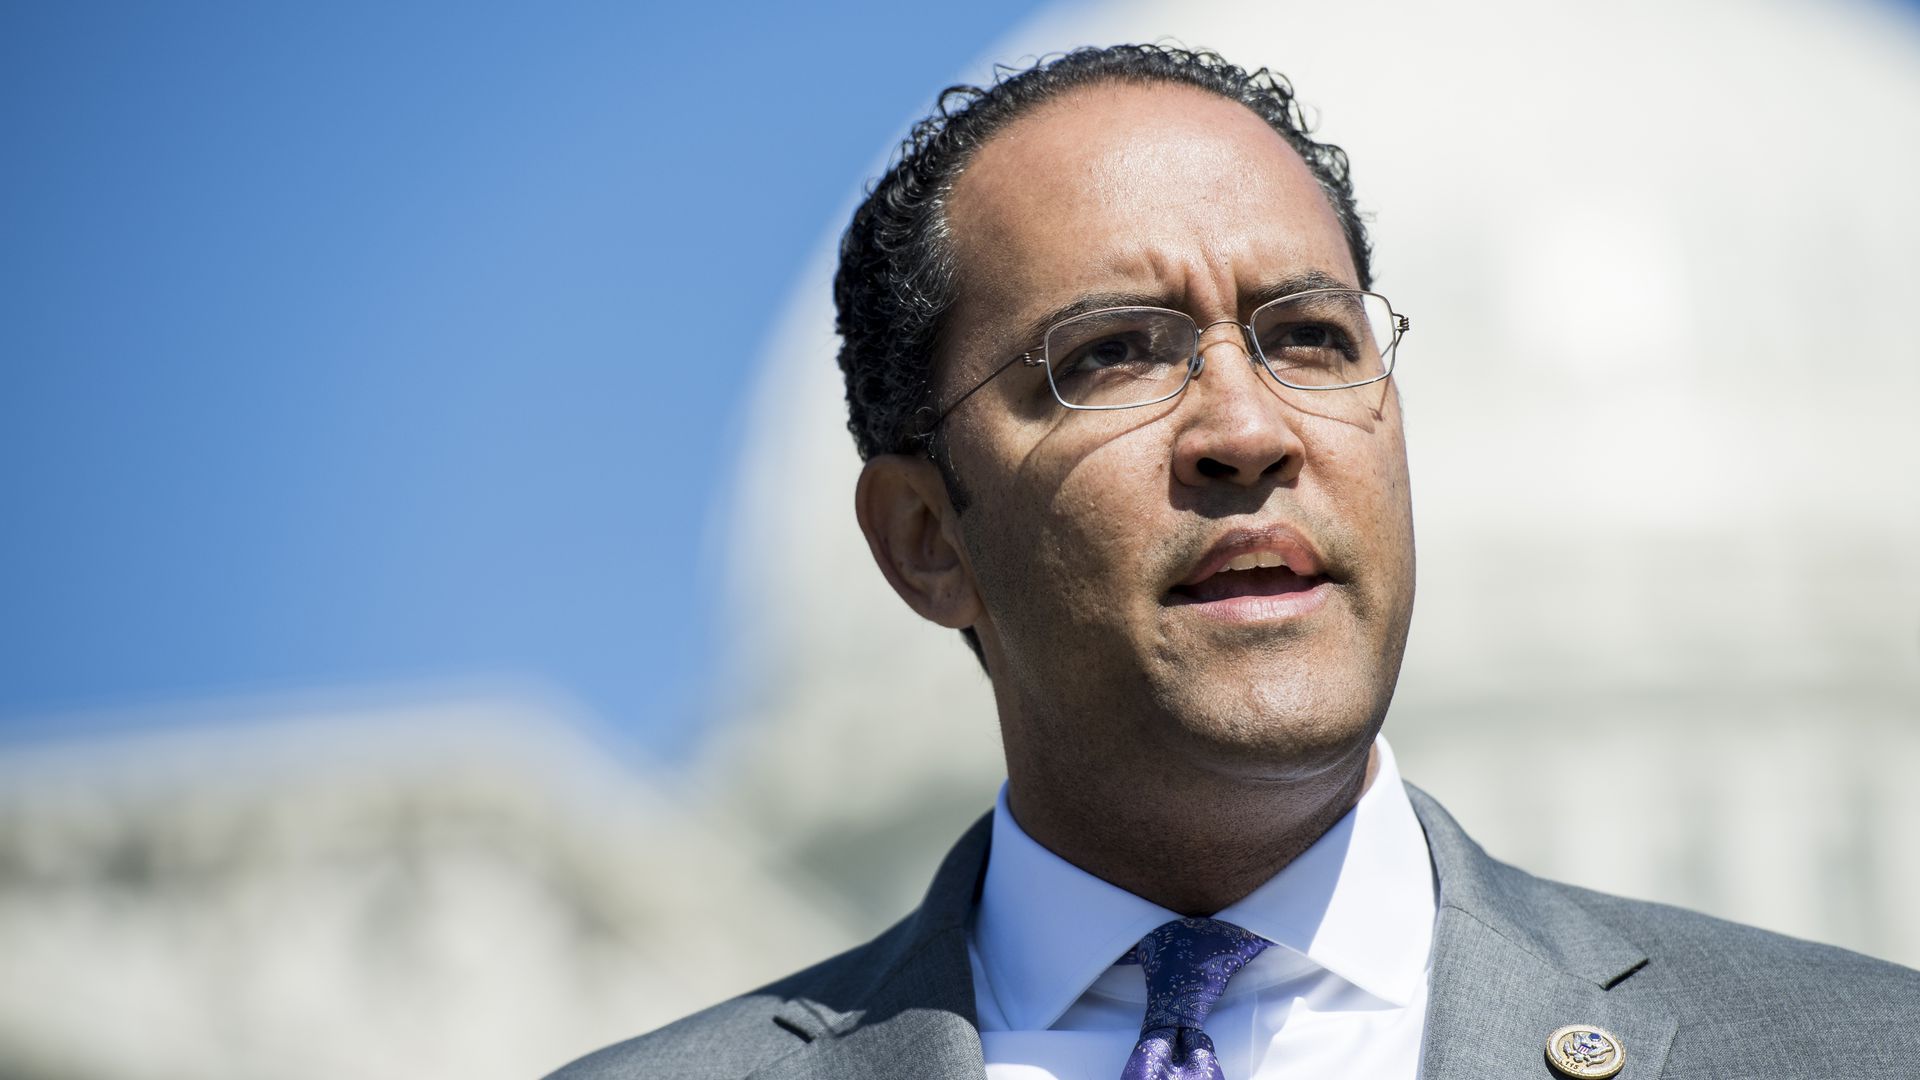 Rep. Will Hurd speaks in front of the Capitol